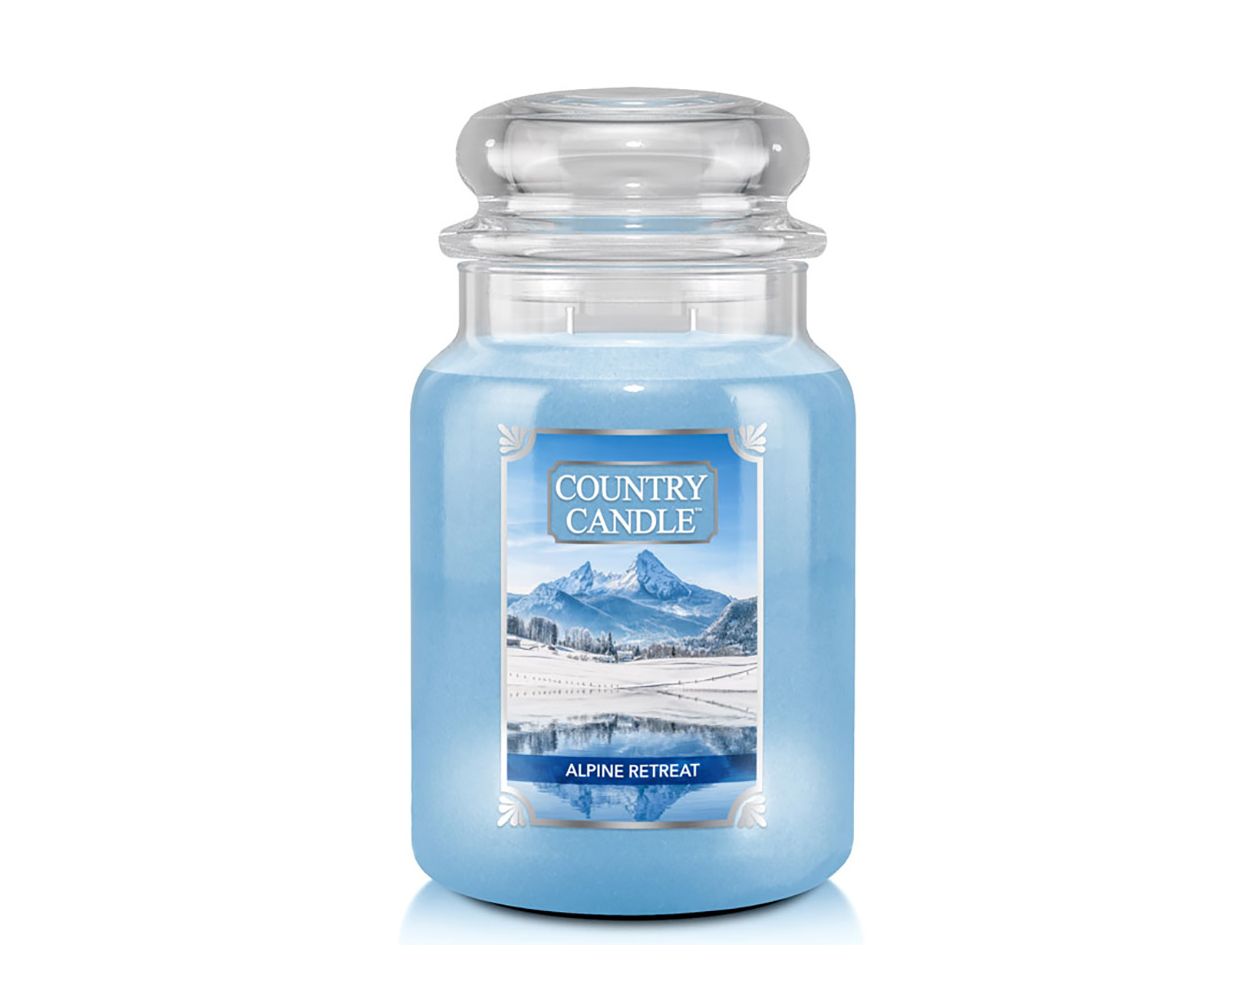 Alpine Retreat Scented Candle from Country Candle